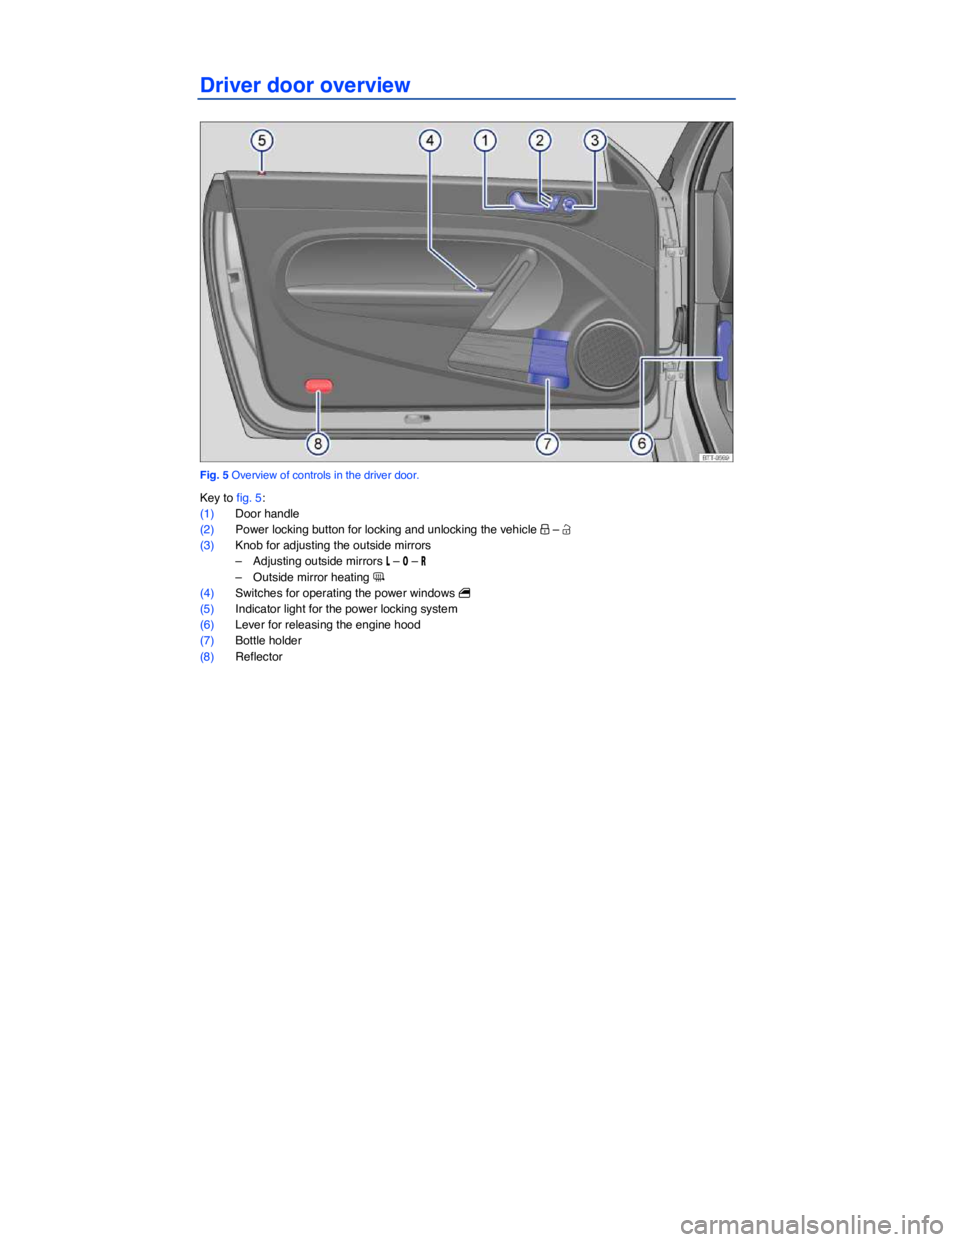 VOLKSWAGEN BEETLE 2015  Owner´s Manual  
Driver door overview 
 
Fig. 5 Overview of controls in the driver door. 
Key to fig. 5: 
(1) Door handle  
(2) Power locking button for locking and unlocking the vehicle �